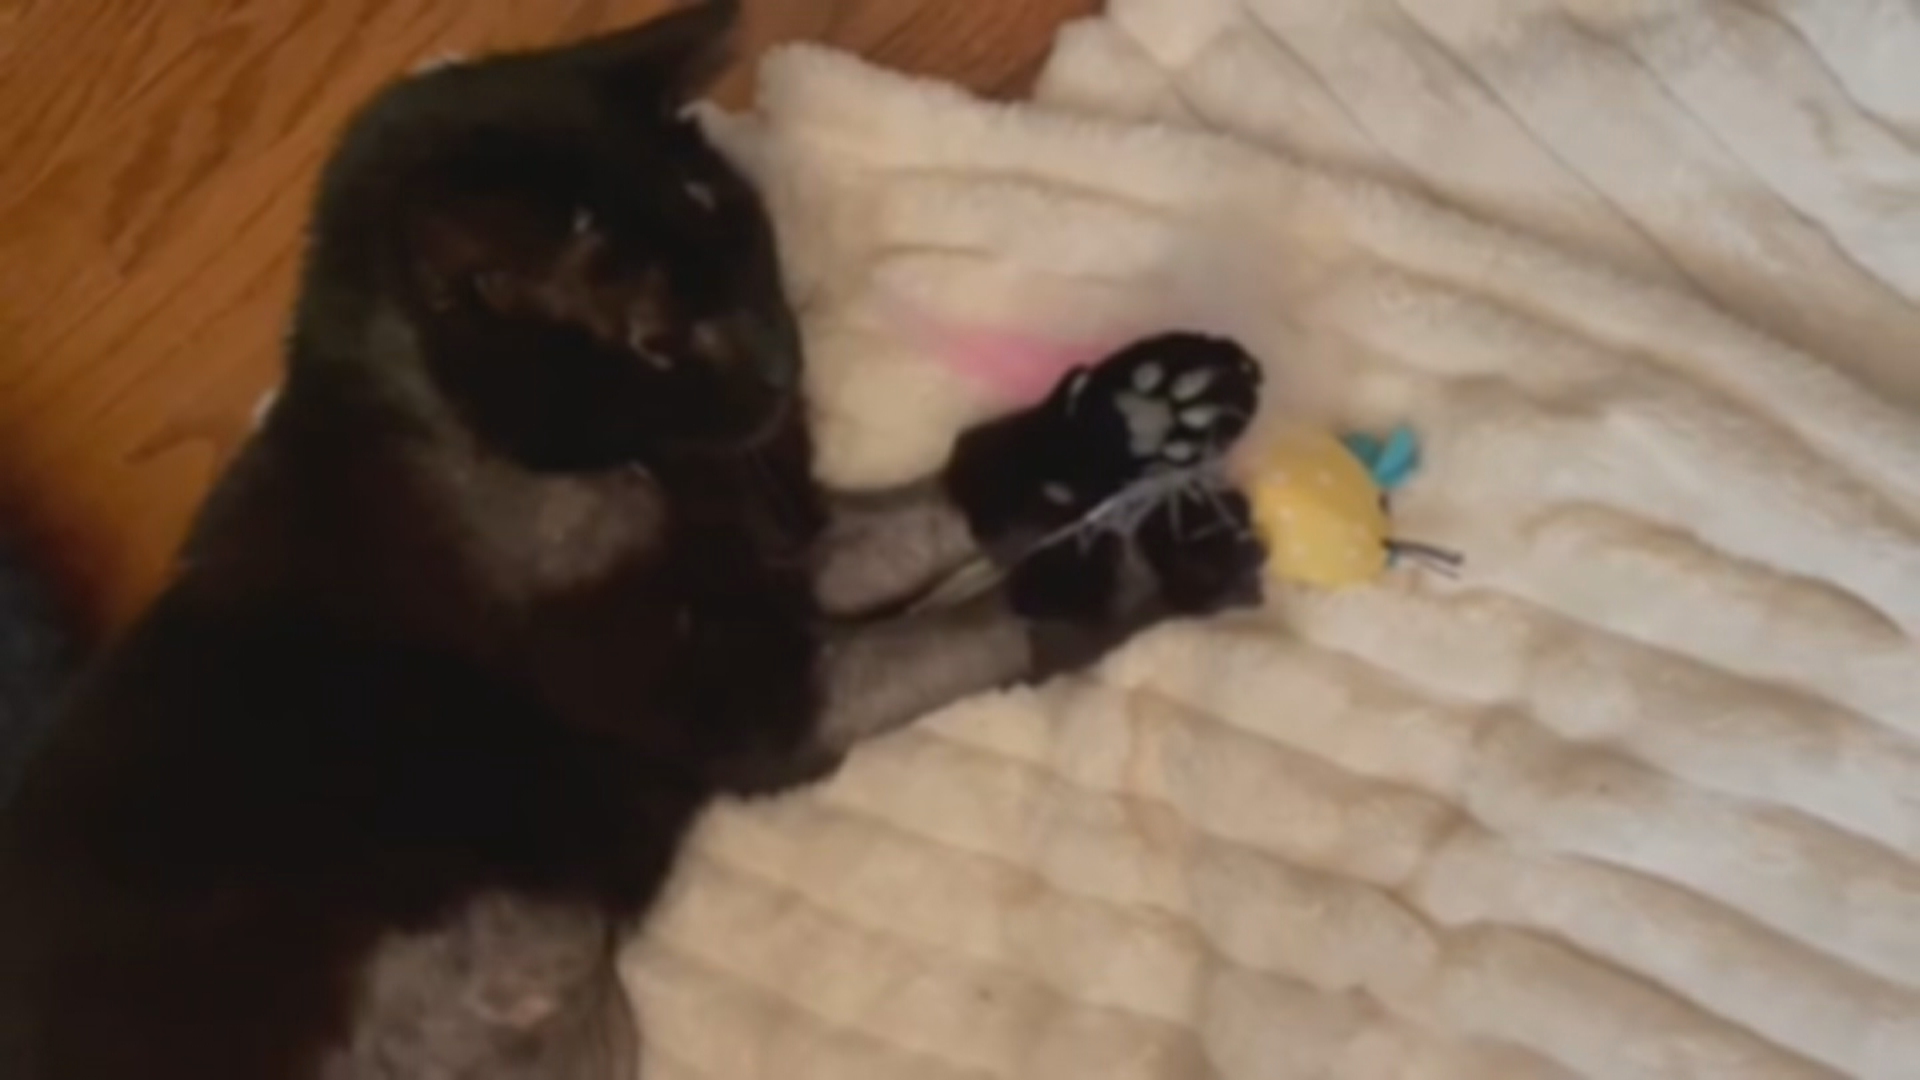 WATCH: Buddy The Cat Settles Into Foster Home After Being Discharged